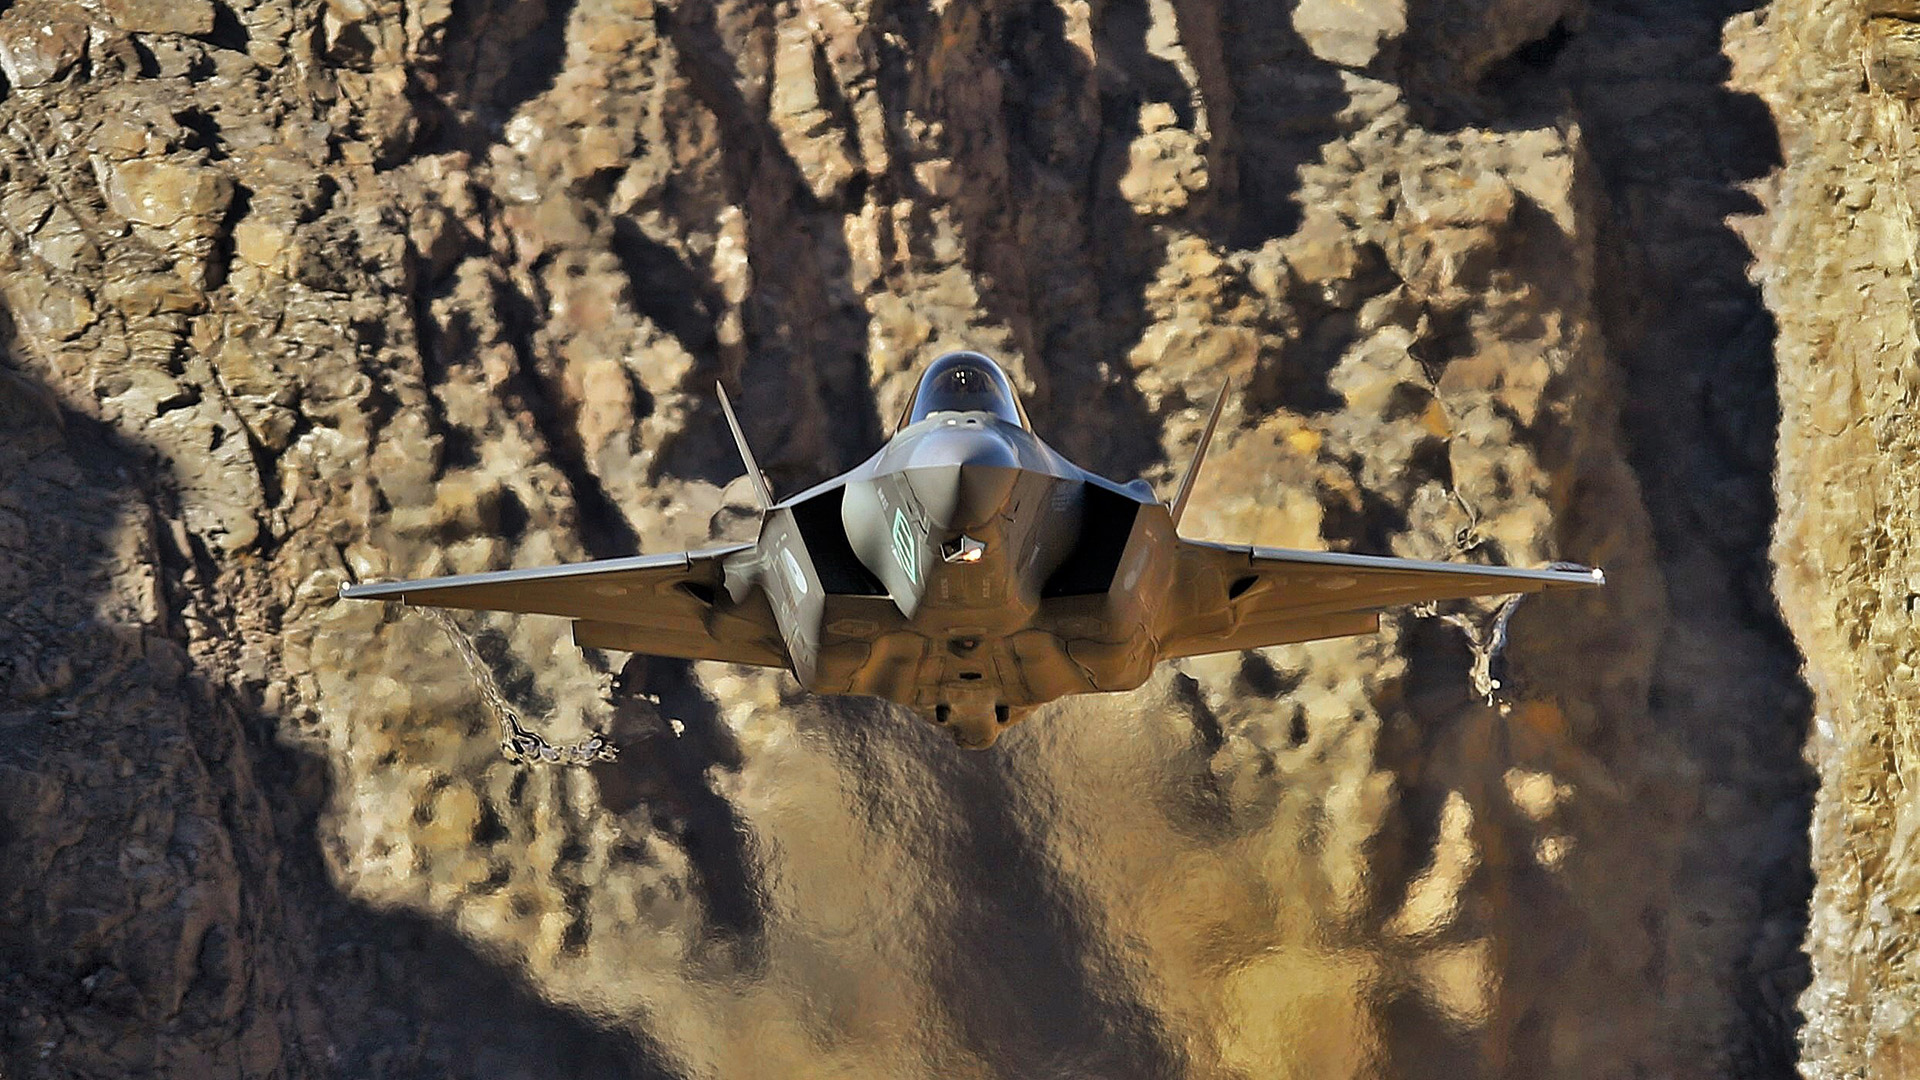 General 1920x1080 military jet fighter Lockheed Martin F-35 Lightning II military aircraft vehicle aircraft